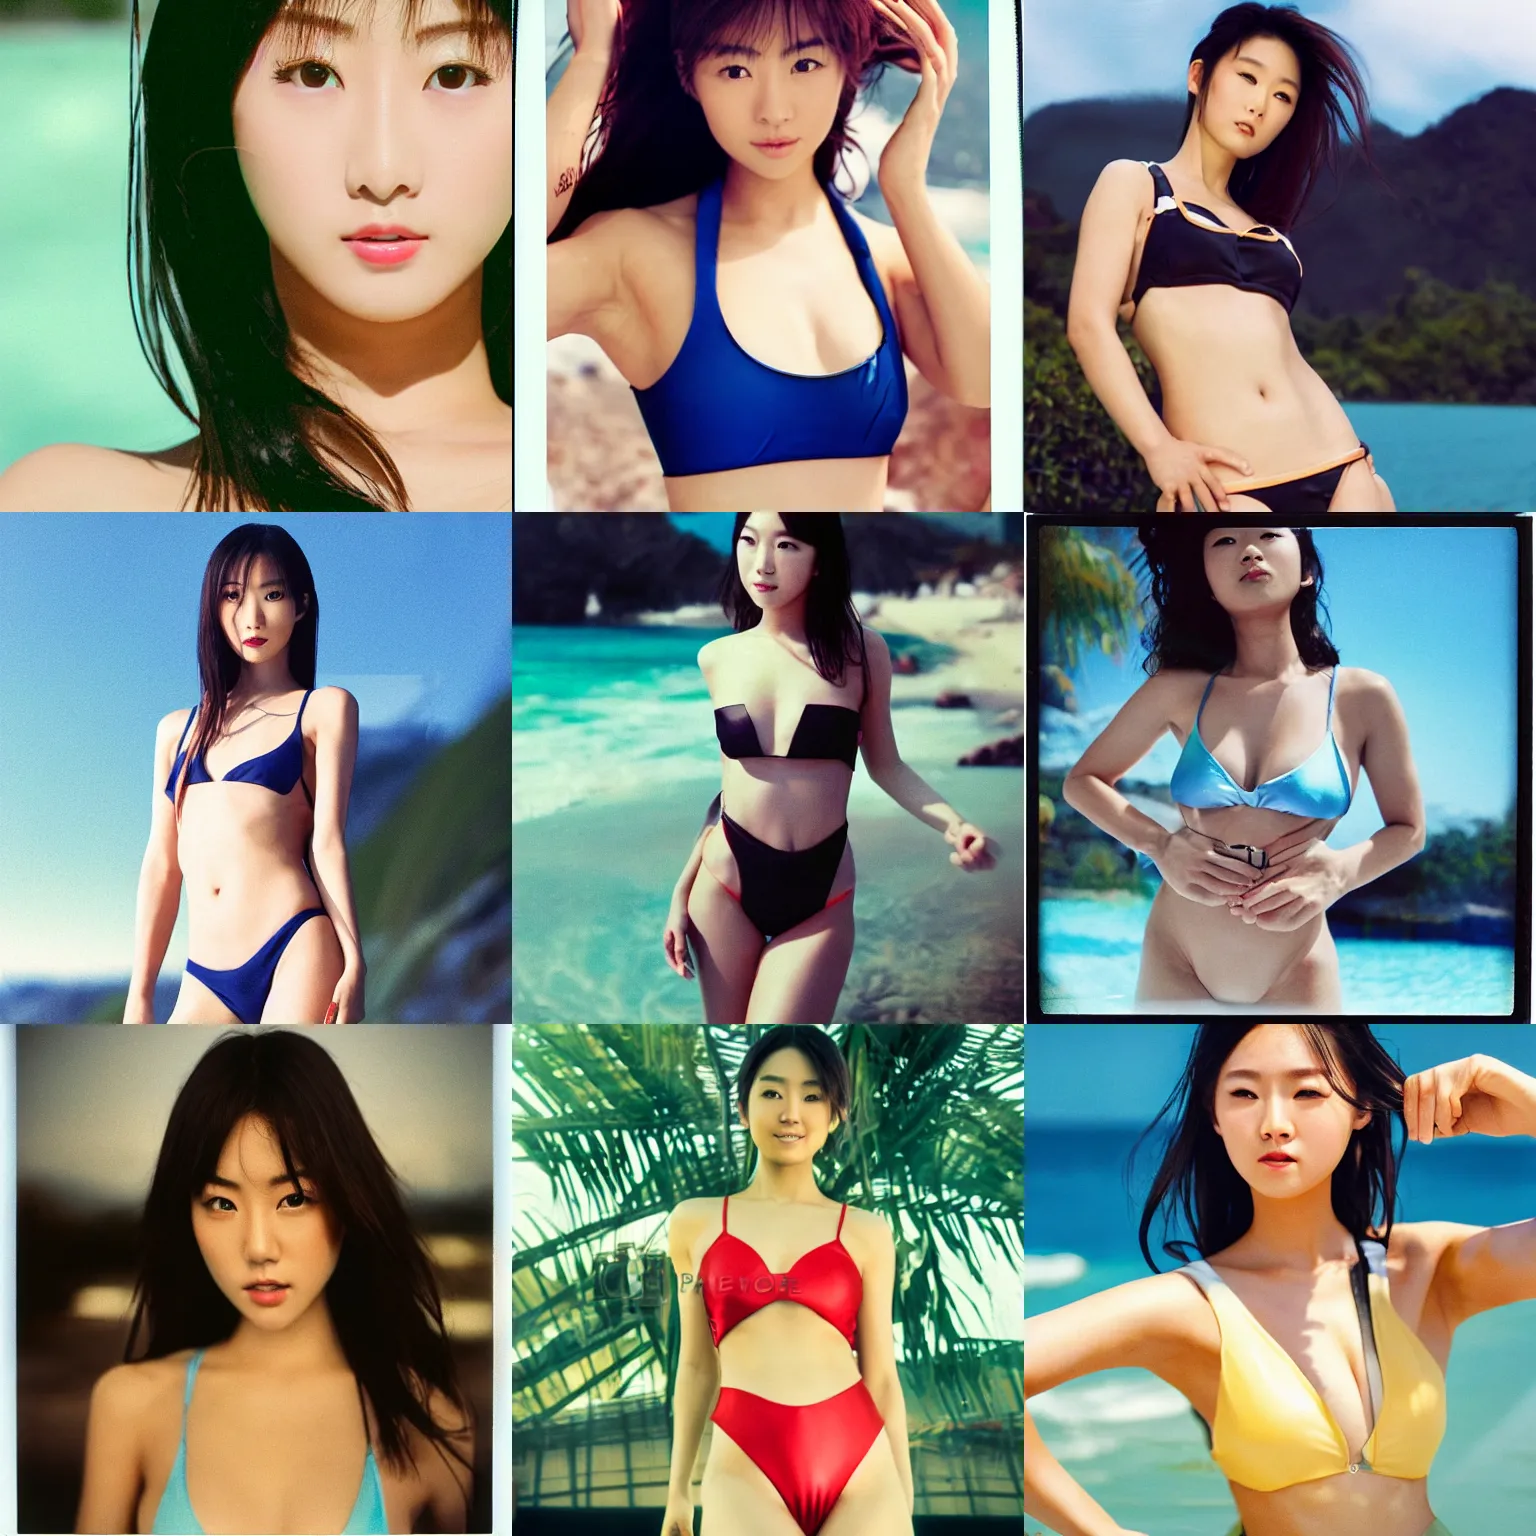 Prompt: Worksafe,8K HD incredible dynamic movie shot,very close-up young beautiful gorgeous cute Japanese actress supermodel J-Pop AV idol girl posing in swimsuit.High budget Hollywood movie.At Behance and Instagram,taken with polaroid kodak portra.Photoshop,Adobe After Effects